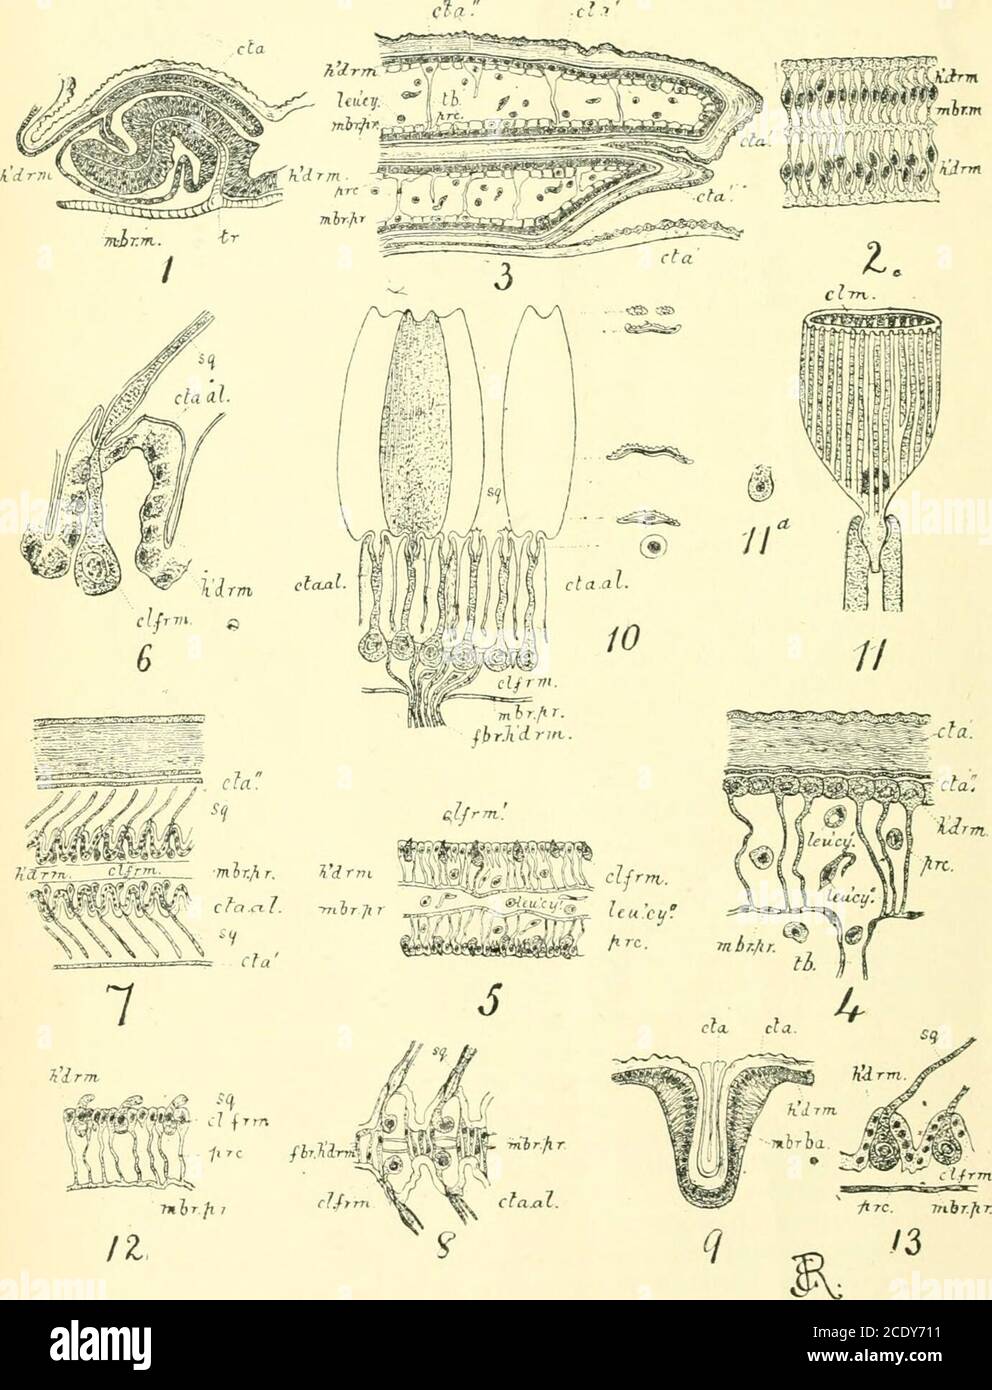 . The Entomologist's record and journal of variation . (JO, line 2-5, for Aug 4th, 1890, read Sept. 4th, 1890. - W. B.RNEa, 7, New Uoad, Eeiuling. p. 44, line 9 from bottom, for Axpidiajnoi read Asiiiiliotits. p sO, line(), for specimen read species. Vol. IX. Plate III.. ThK DKVKLOIMIO.NT OK THE WlXG, ^YI^•^;-SC•.LES AND TIIEIK rUiMENTS IXBUTTEKFLIEri AND MoTHS. Kiitom. llii-ord, etc, ls.(7 ^-^ AND ^/ii^ JOURNAL OF VARIATION. Vol. IX. No. 6. June 15th, 1897. The development of the wing, wing=scales and their pigmentsin Butterflies and Moths.*- ^Illustrated by Platej. By J. W. TUTT, F.E.S. I. Stock Photo